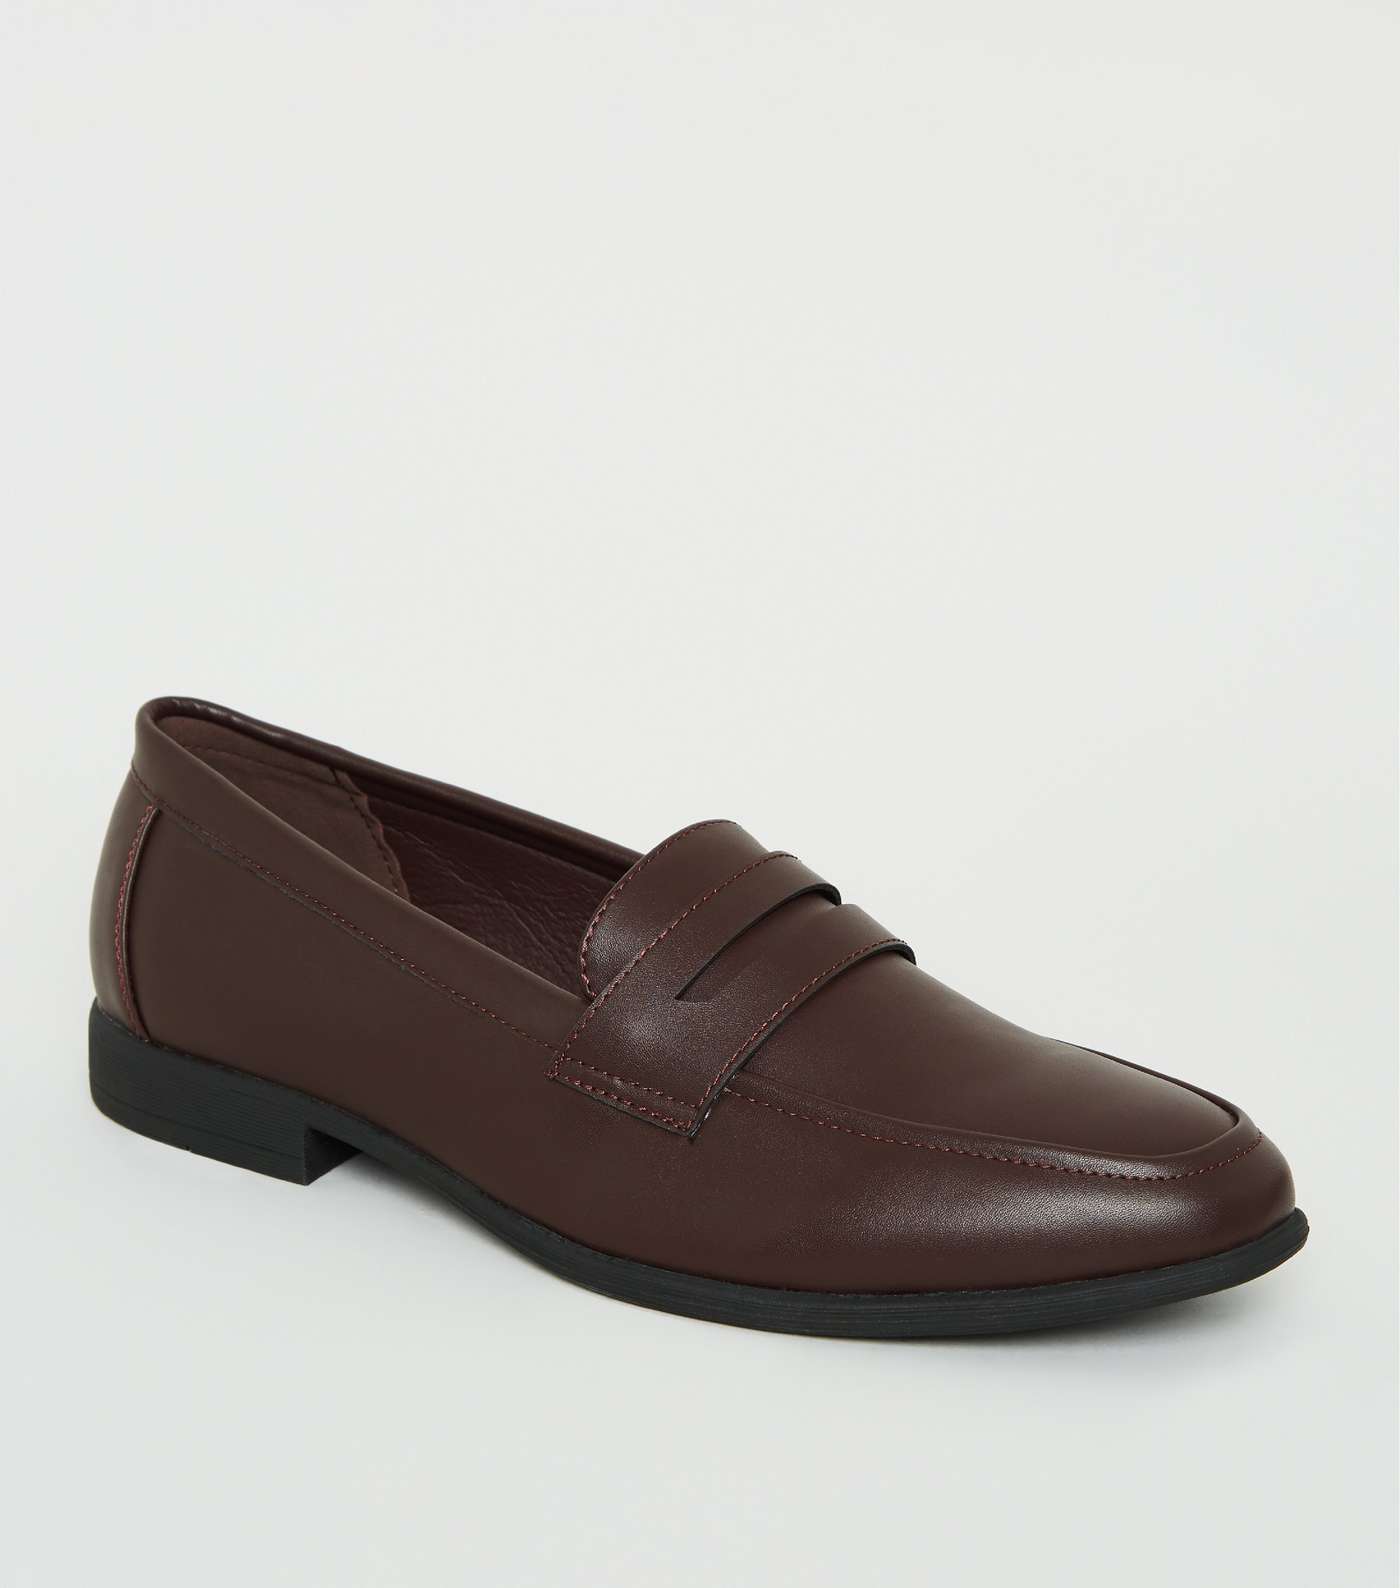 Dark Brown Leather-Look Penny Loafers